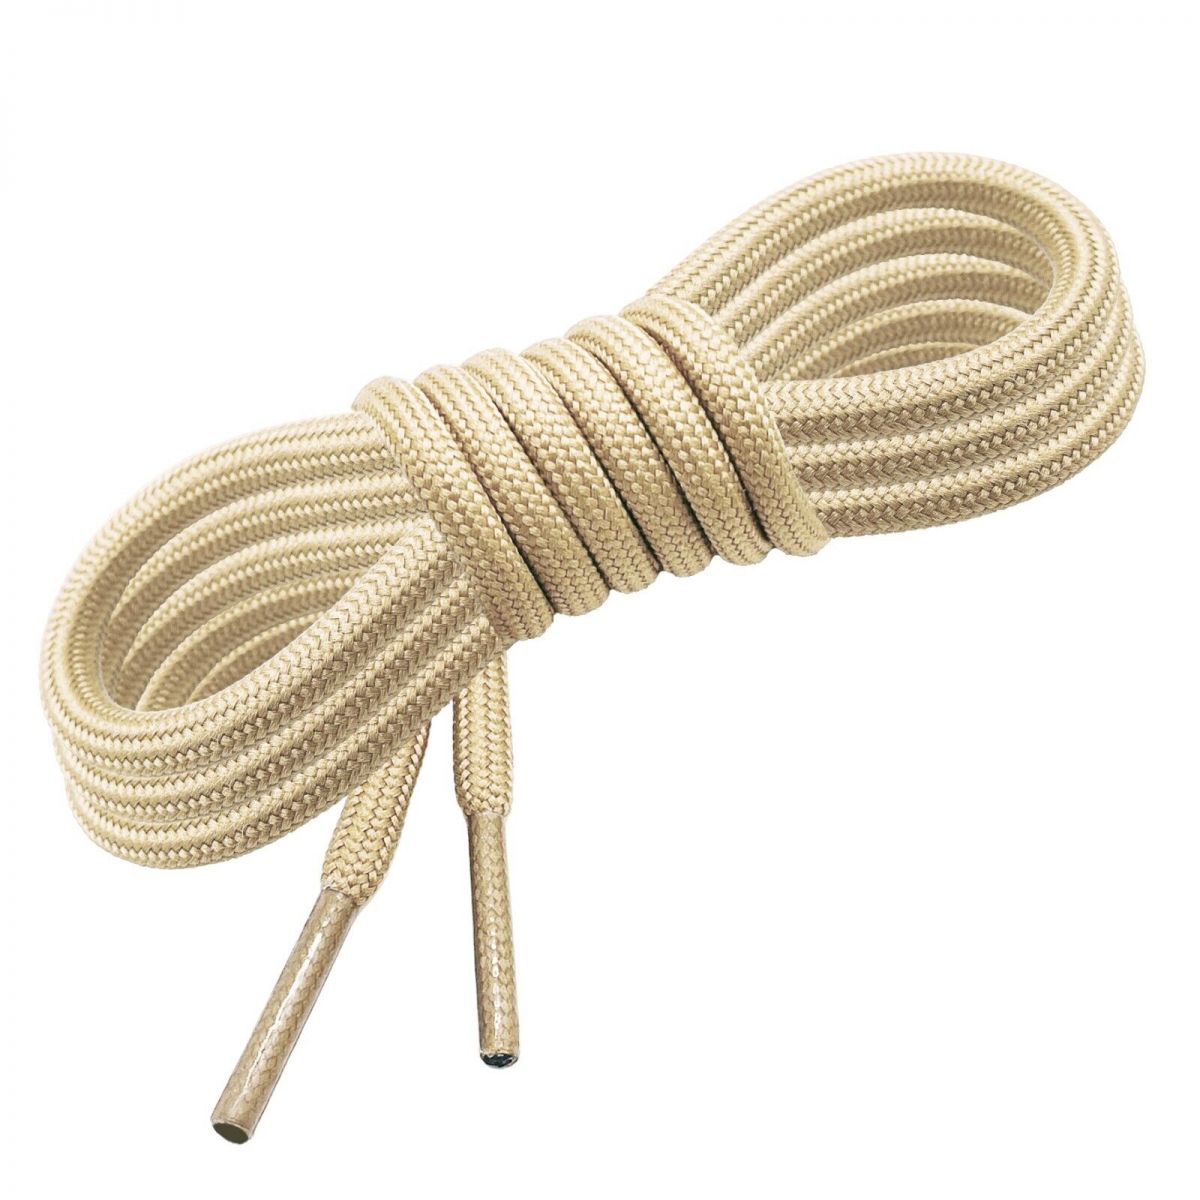 Lemrak 36-inch Replacement Round Shoe Laces Beige (1 pair) - 36-ROPE BEIGE